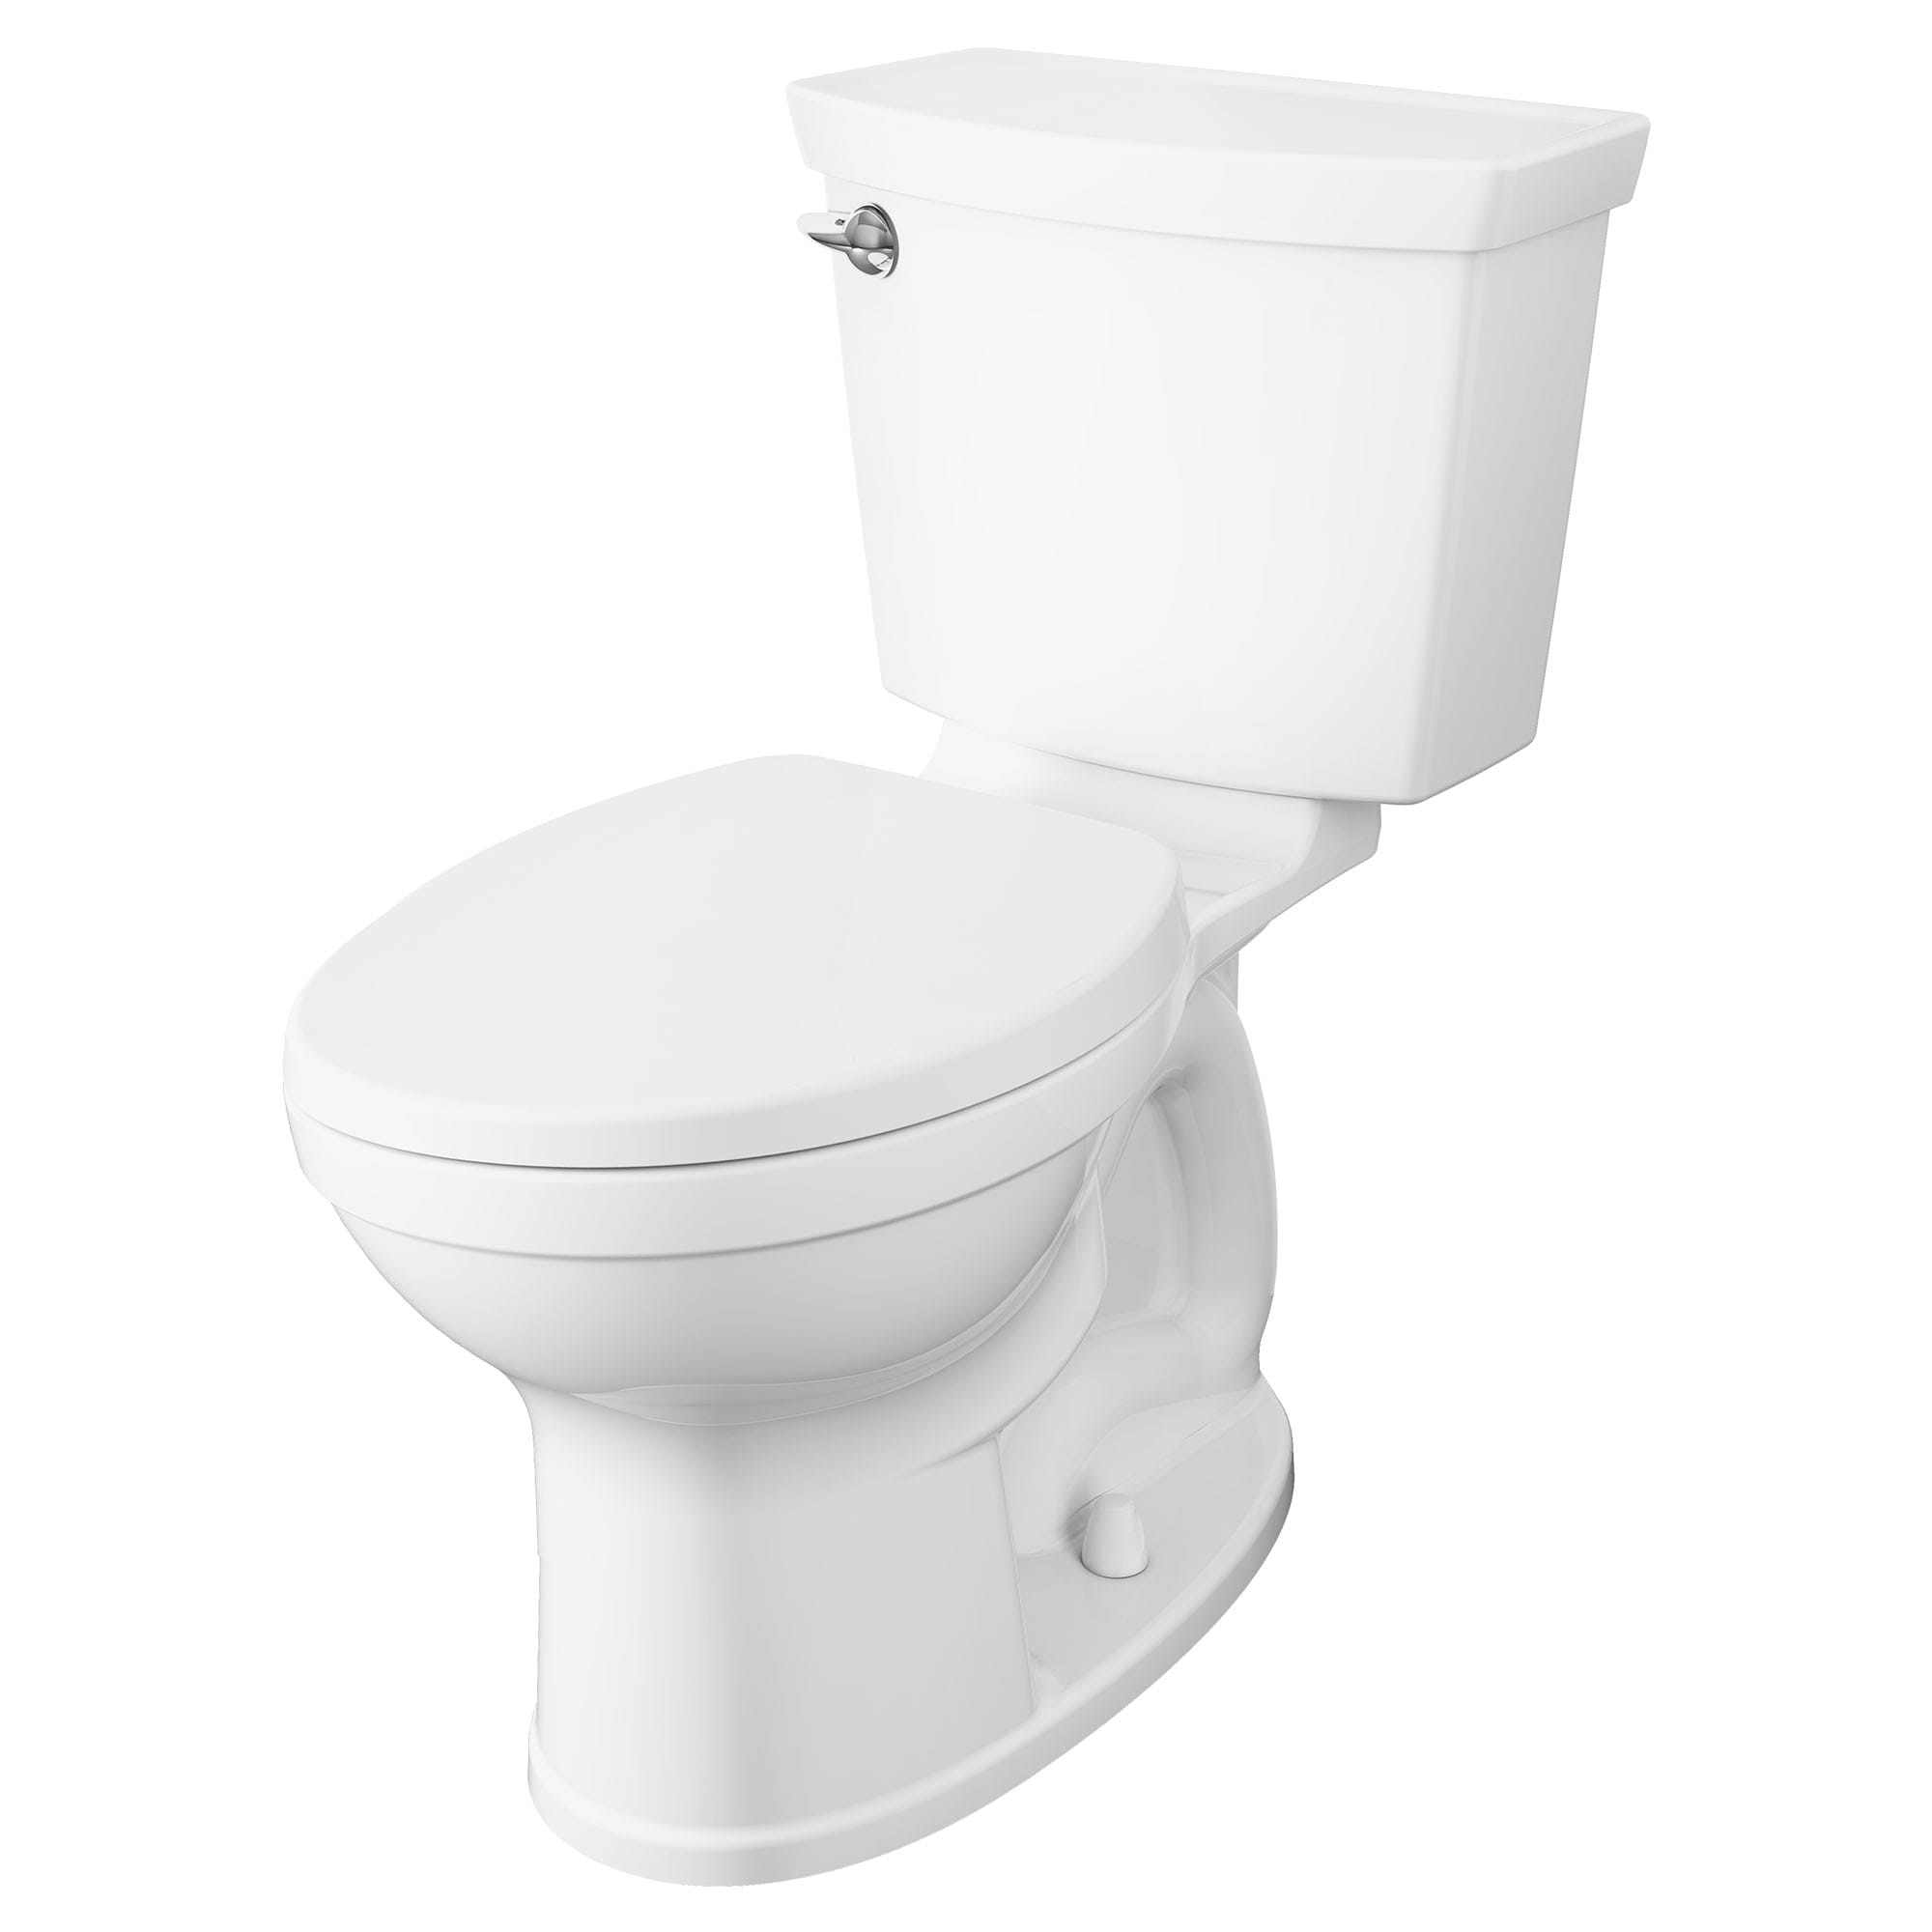 Champion 4 MAX 1.28 GPF/4.8 LPF Left Trip Lever 16-1/2-in. Elongated-Front Toilet